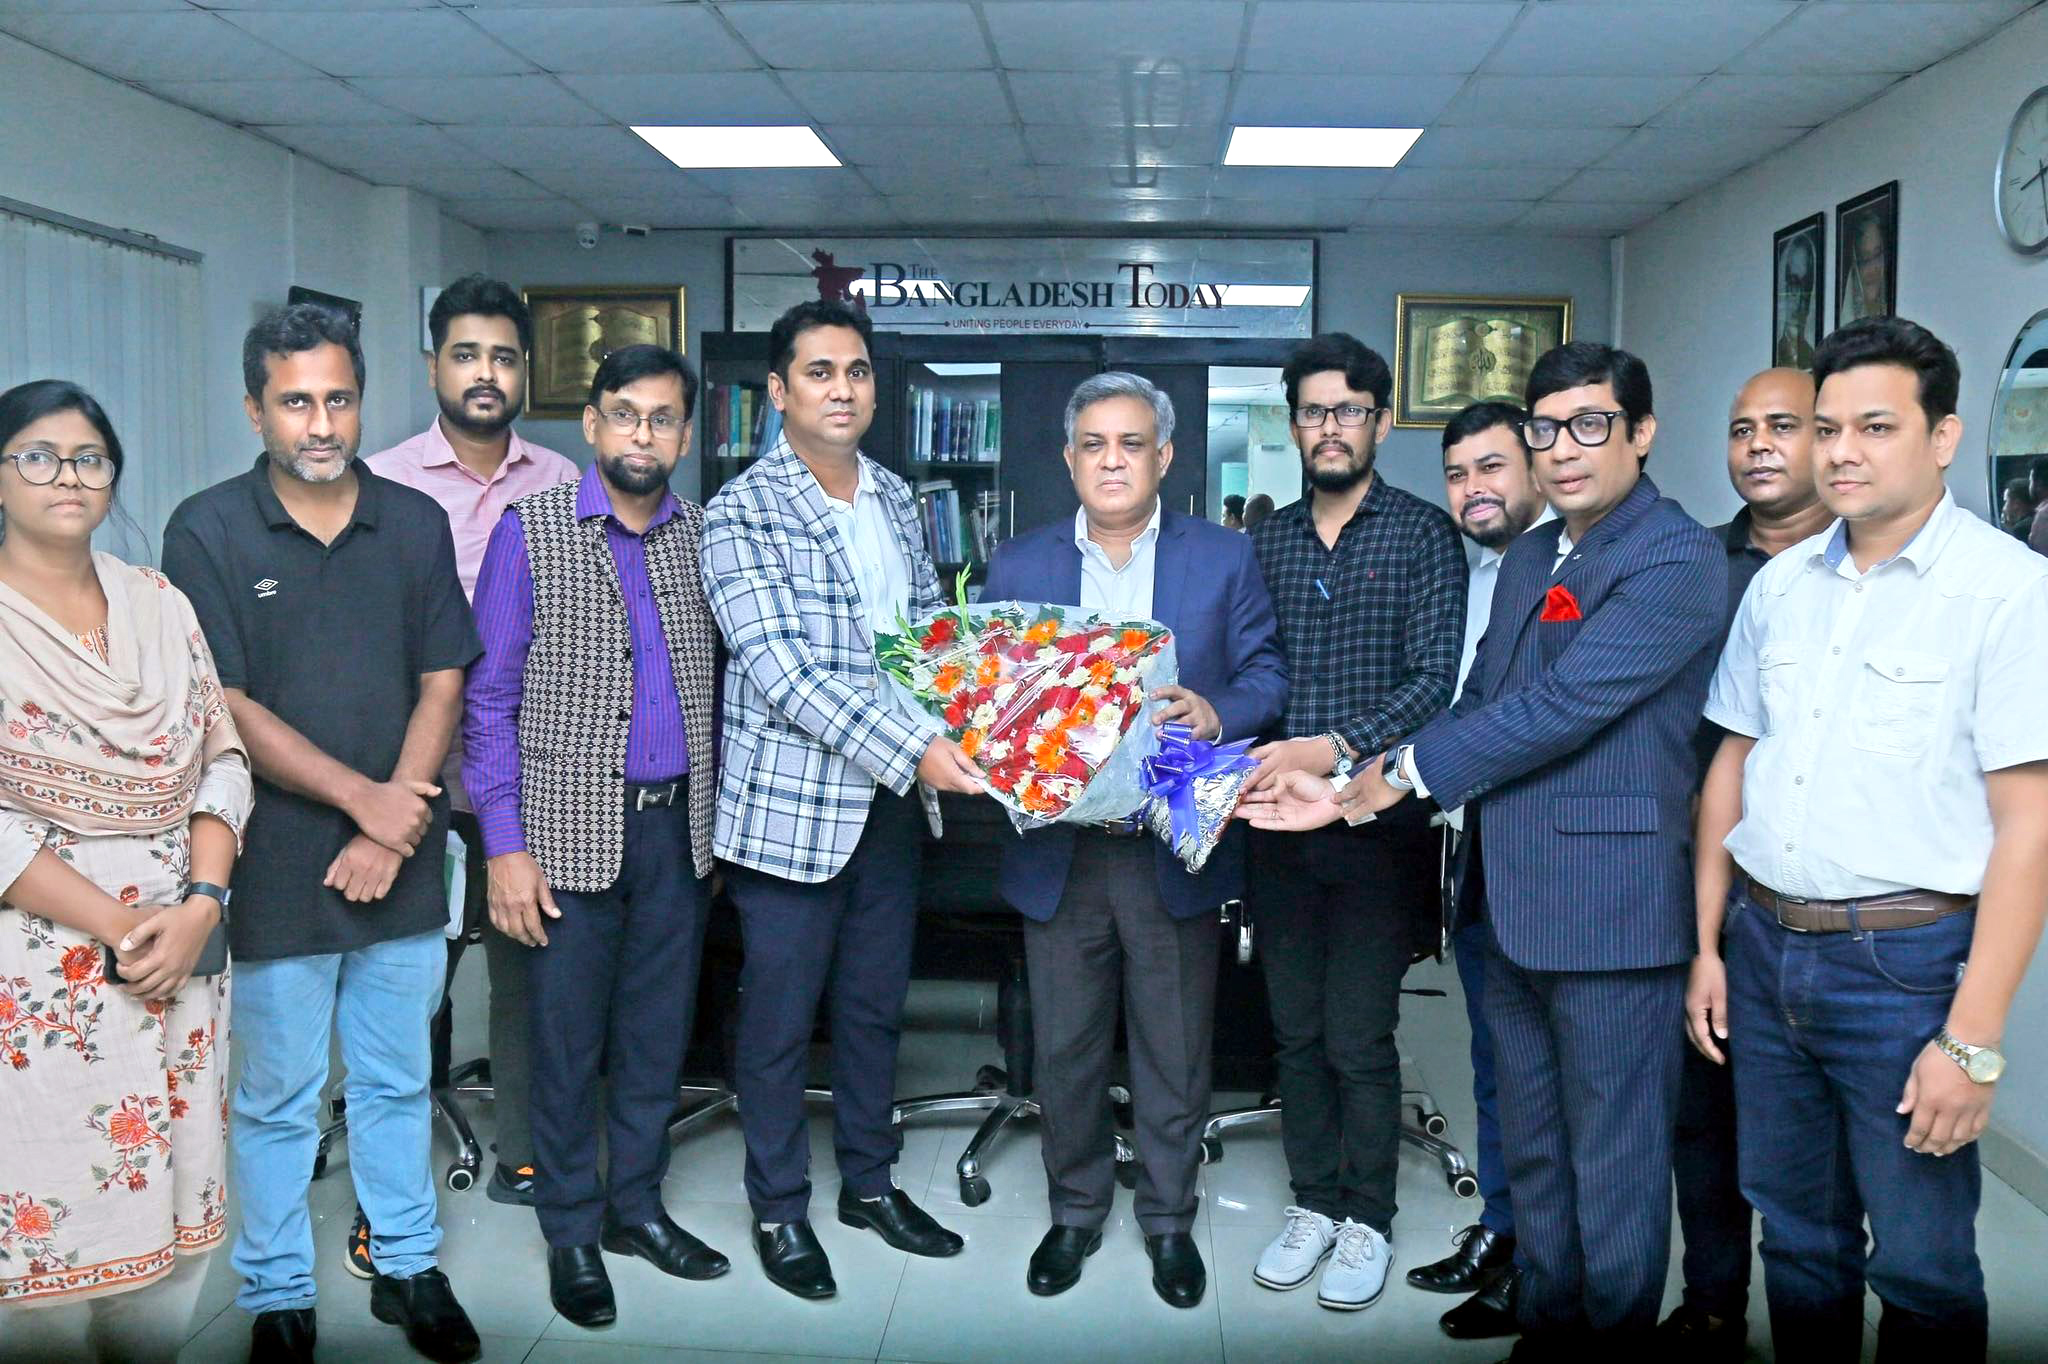 DU Pro-VC visits The Bangladesh Today office